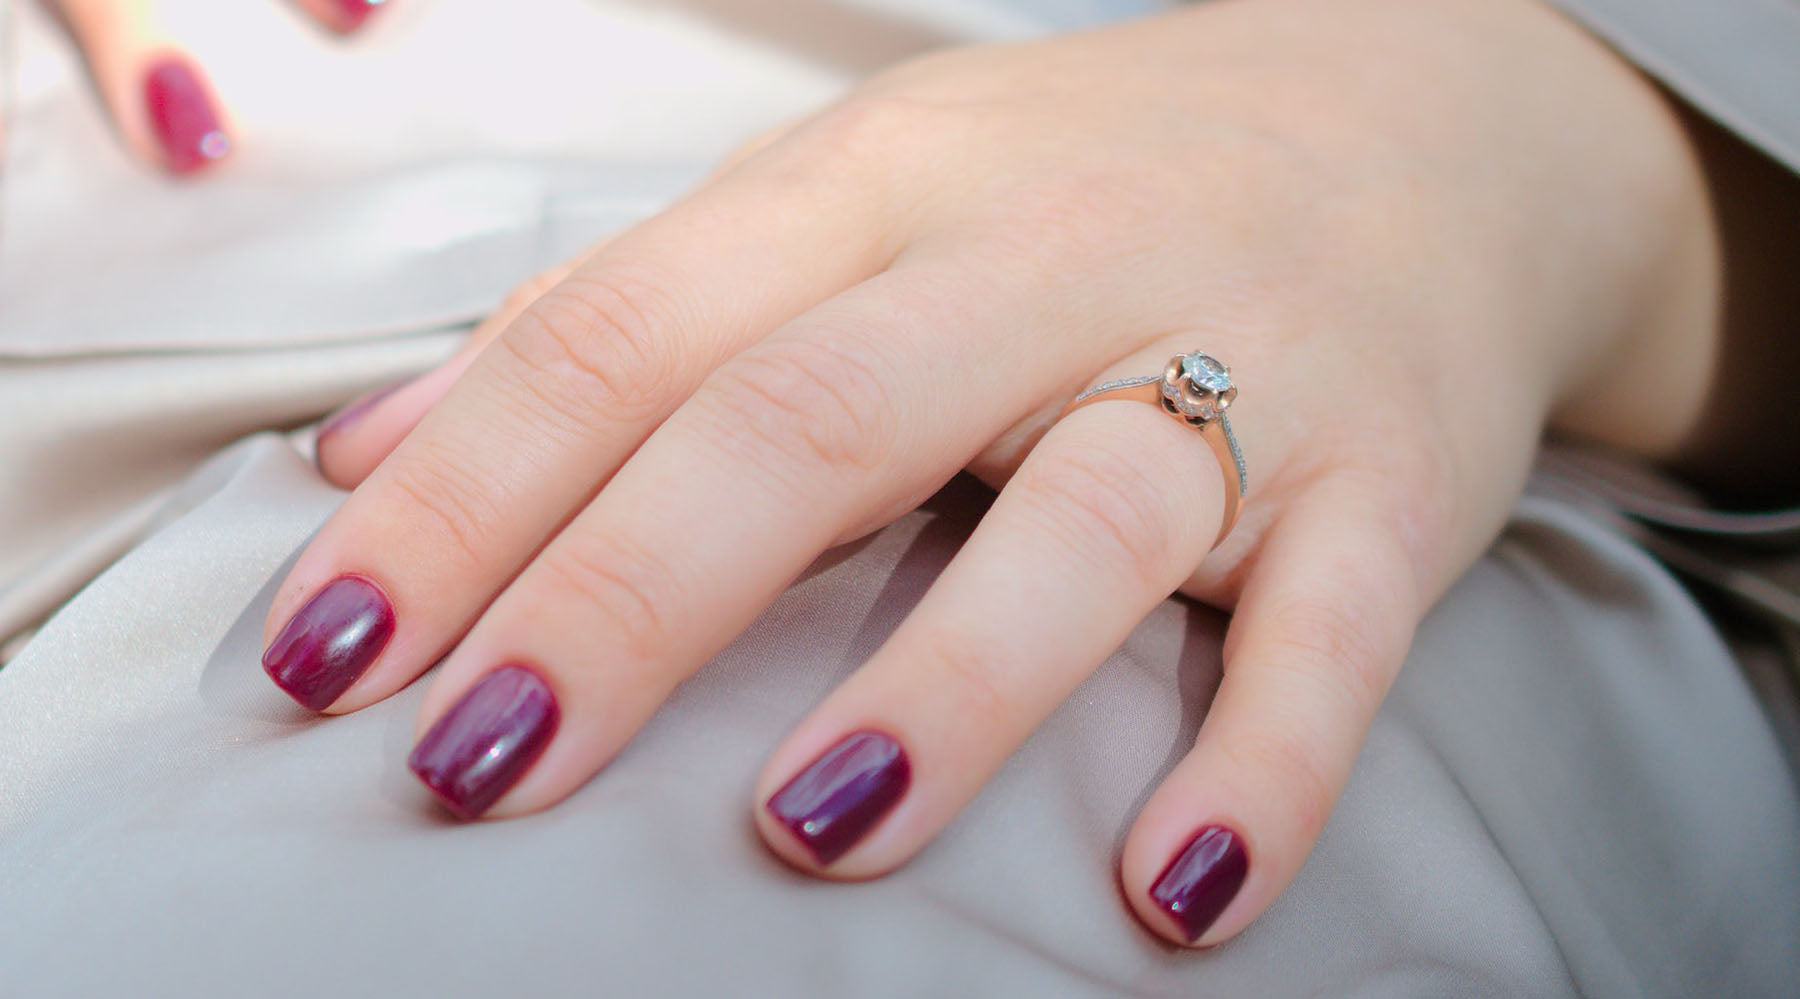 hand of a woman with wine red nail polish and engagement ring